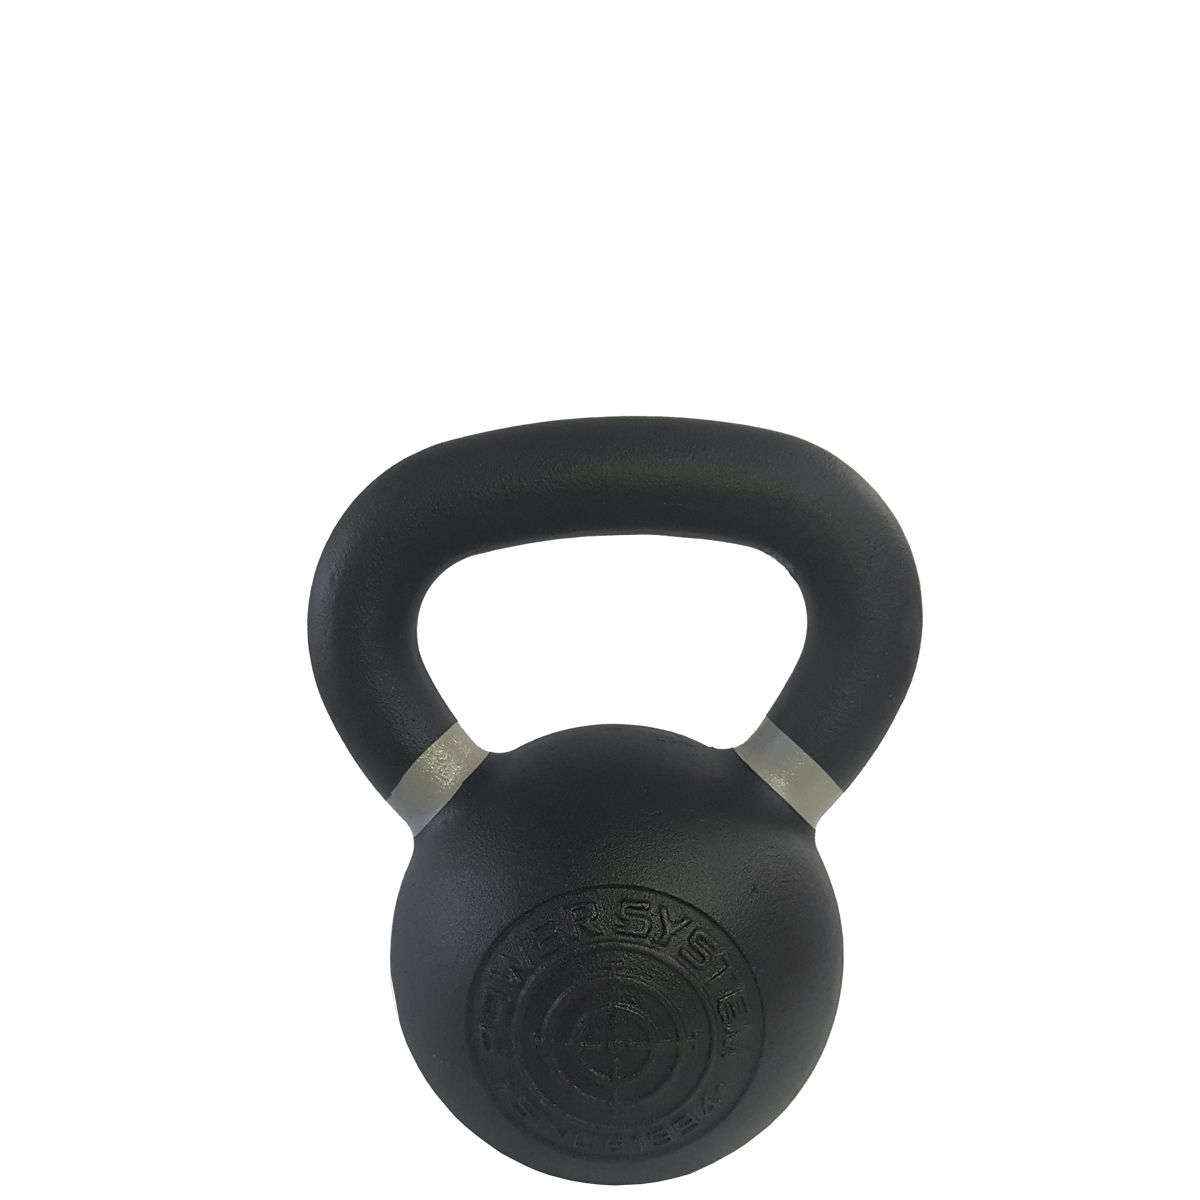 POWER SYSTEM - EXTREME STRENGTH KETTLEBELL PS 4104 - 16 KG